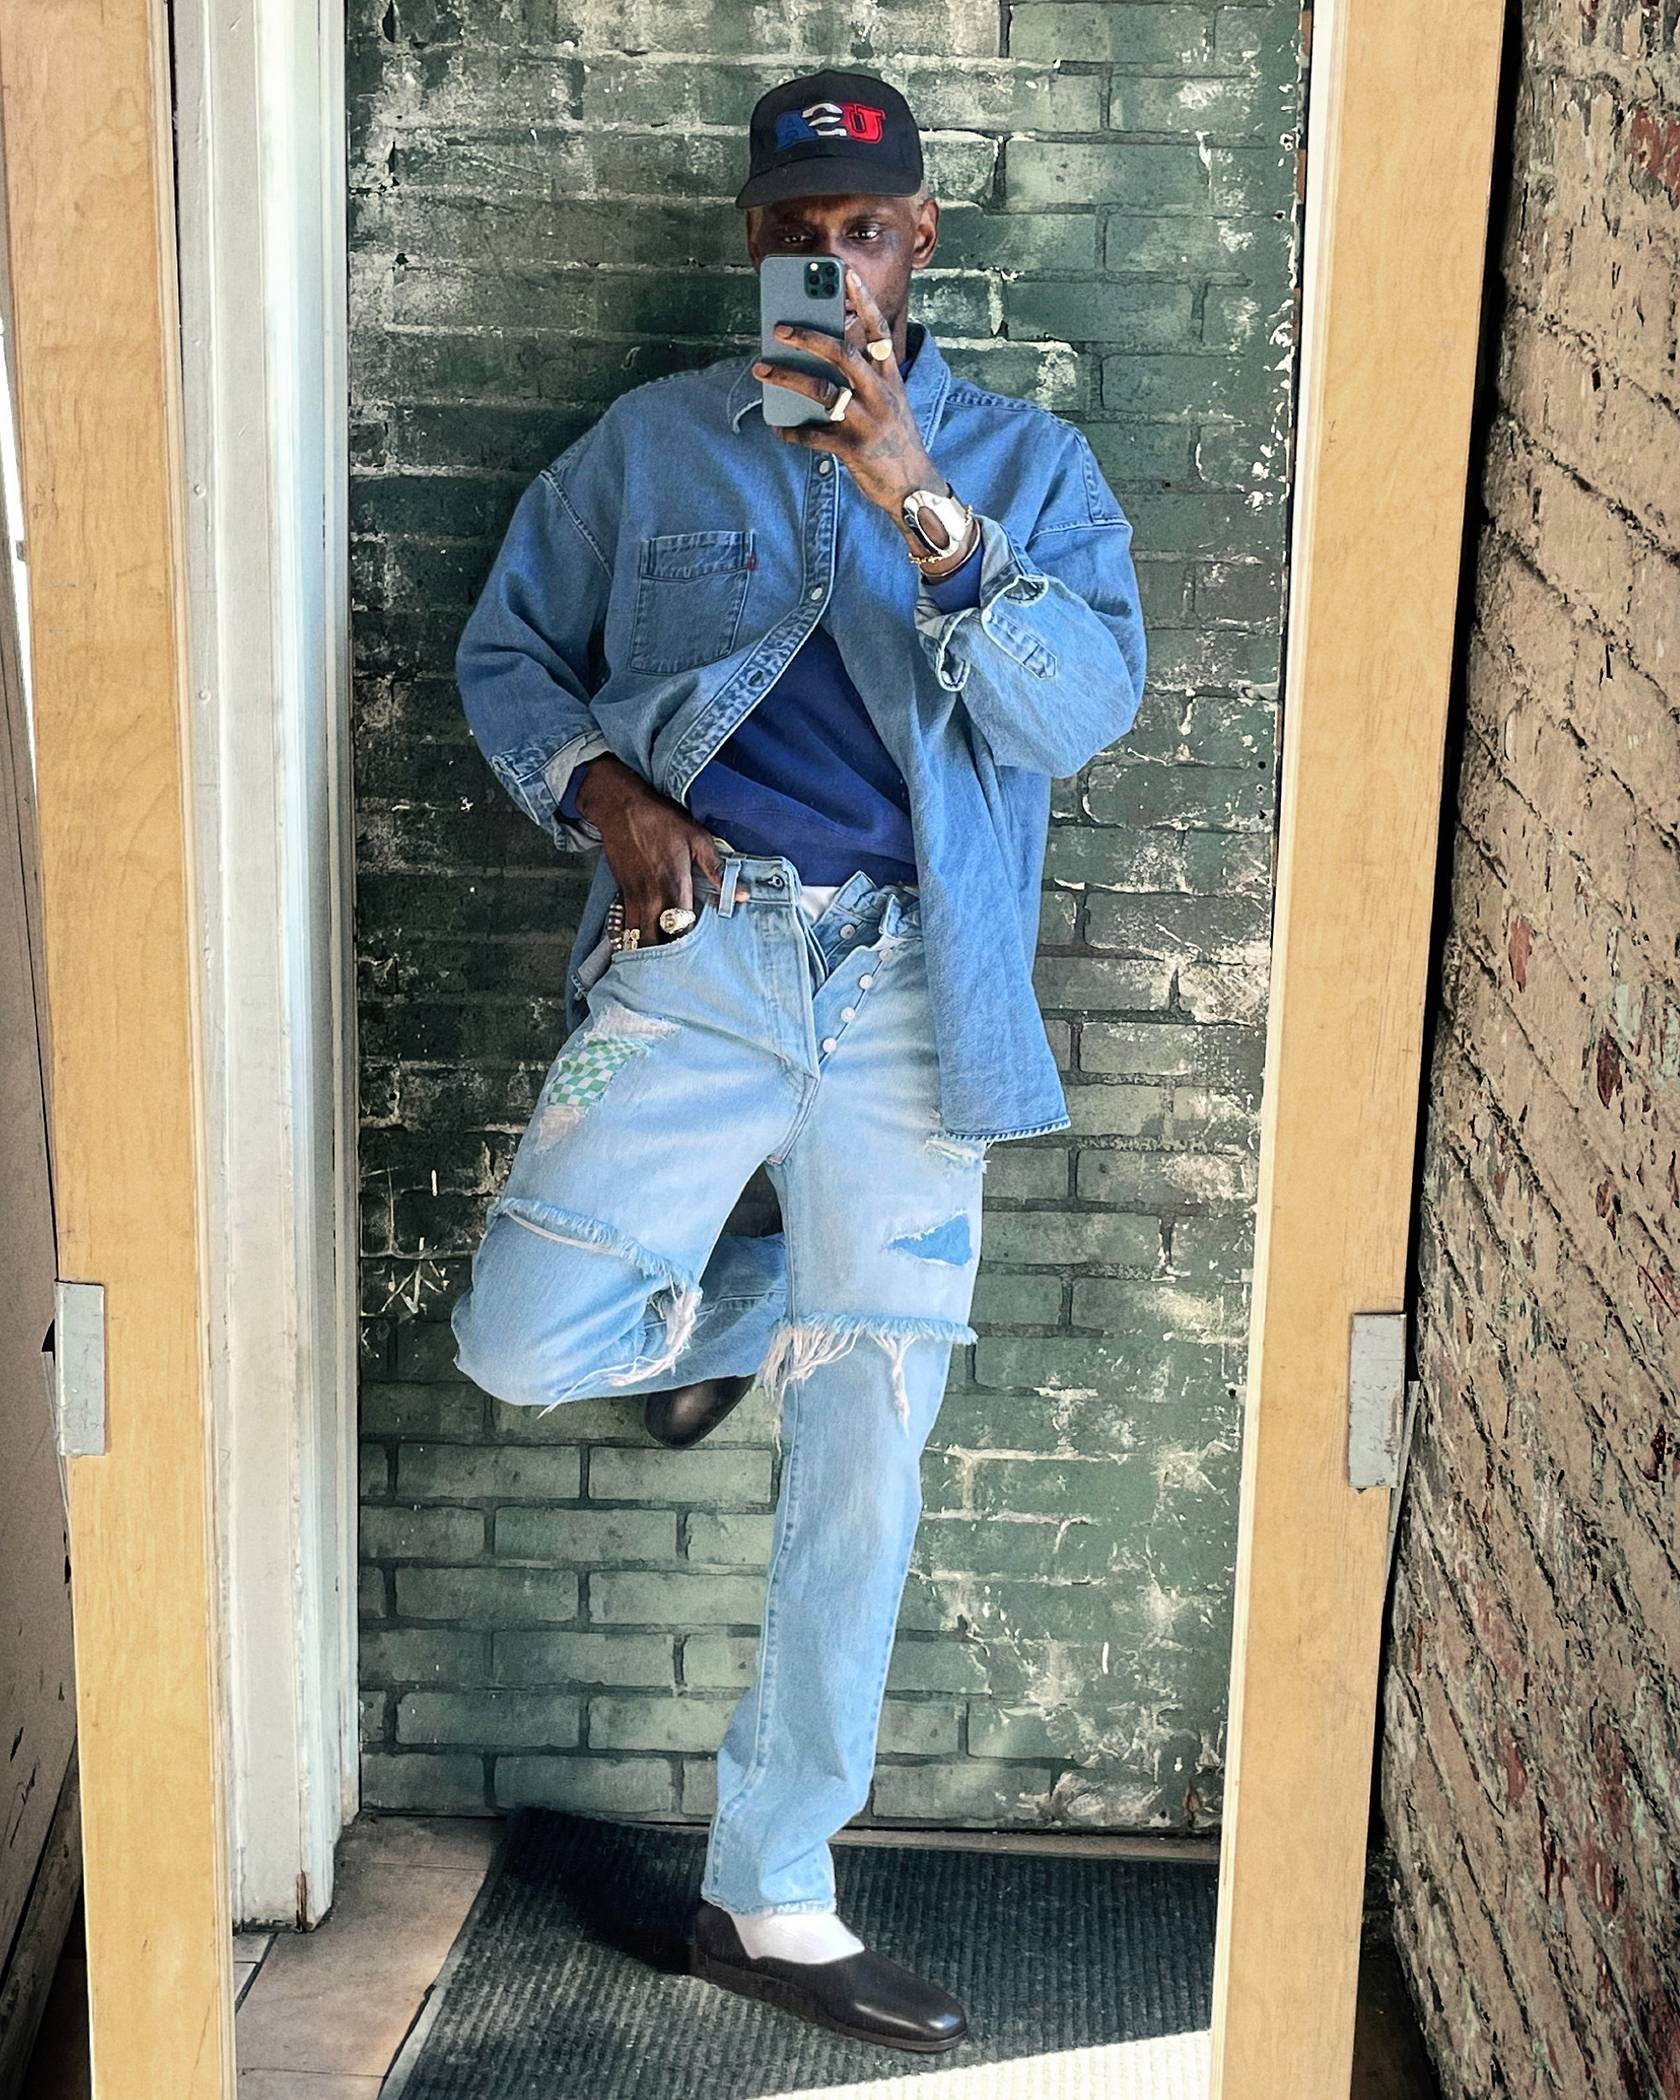 Image of man leaning against wall taking photo of his styled denim look